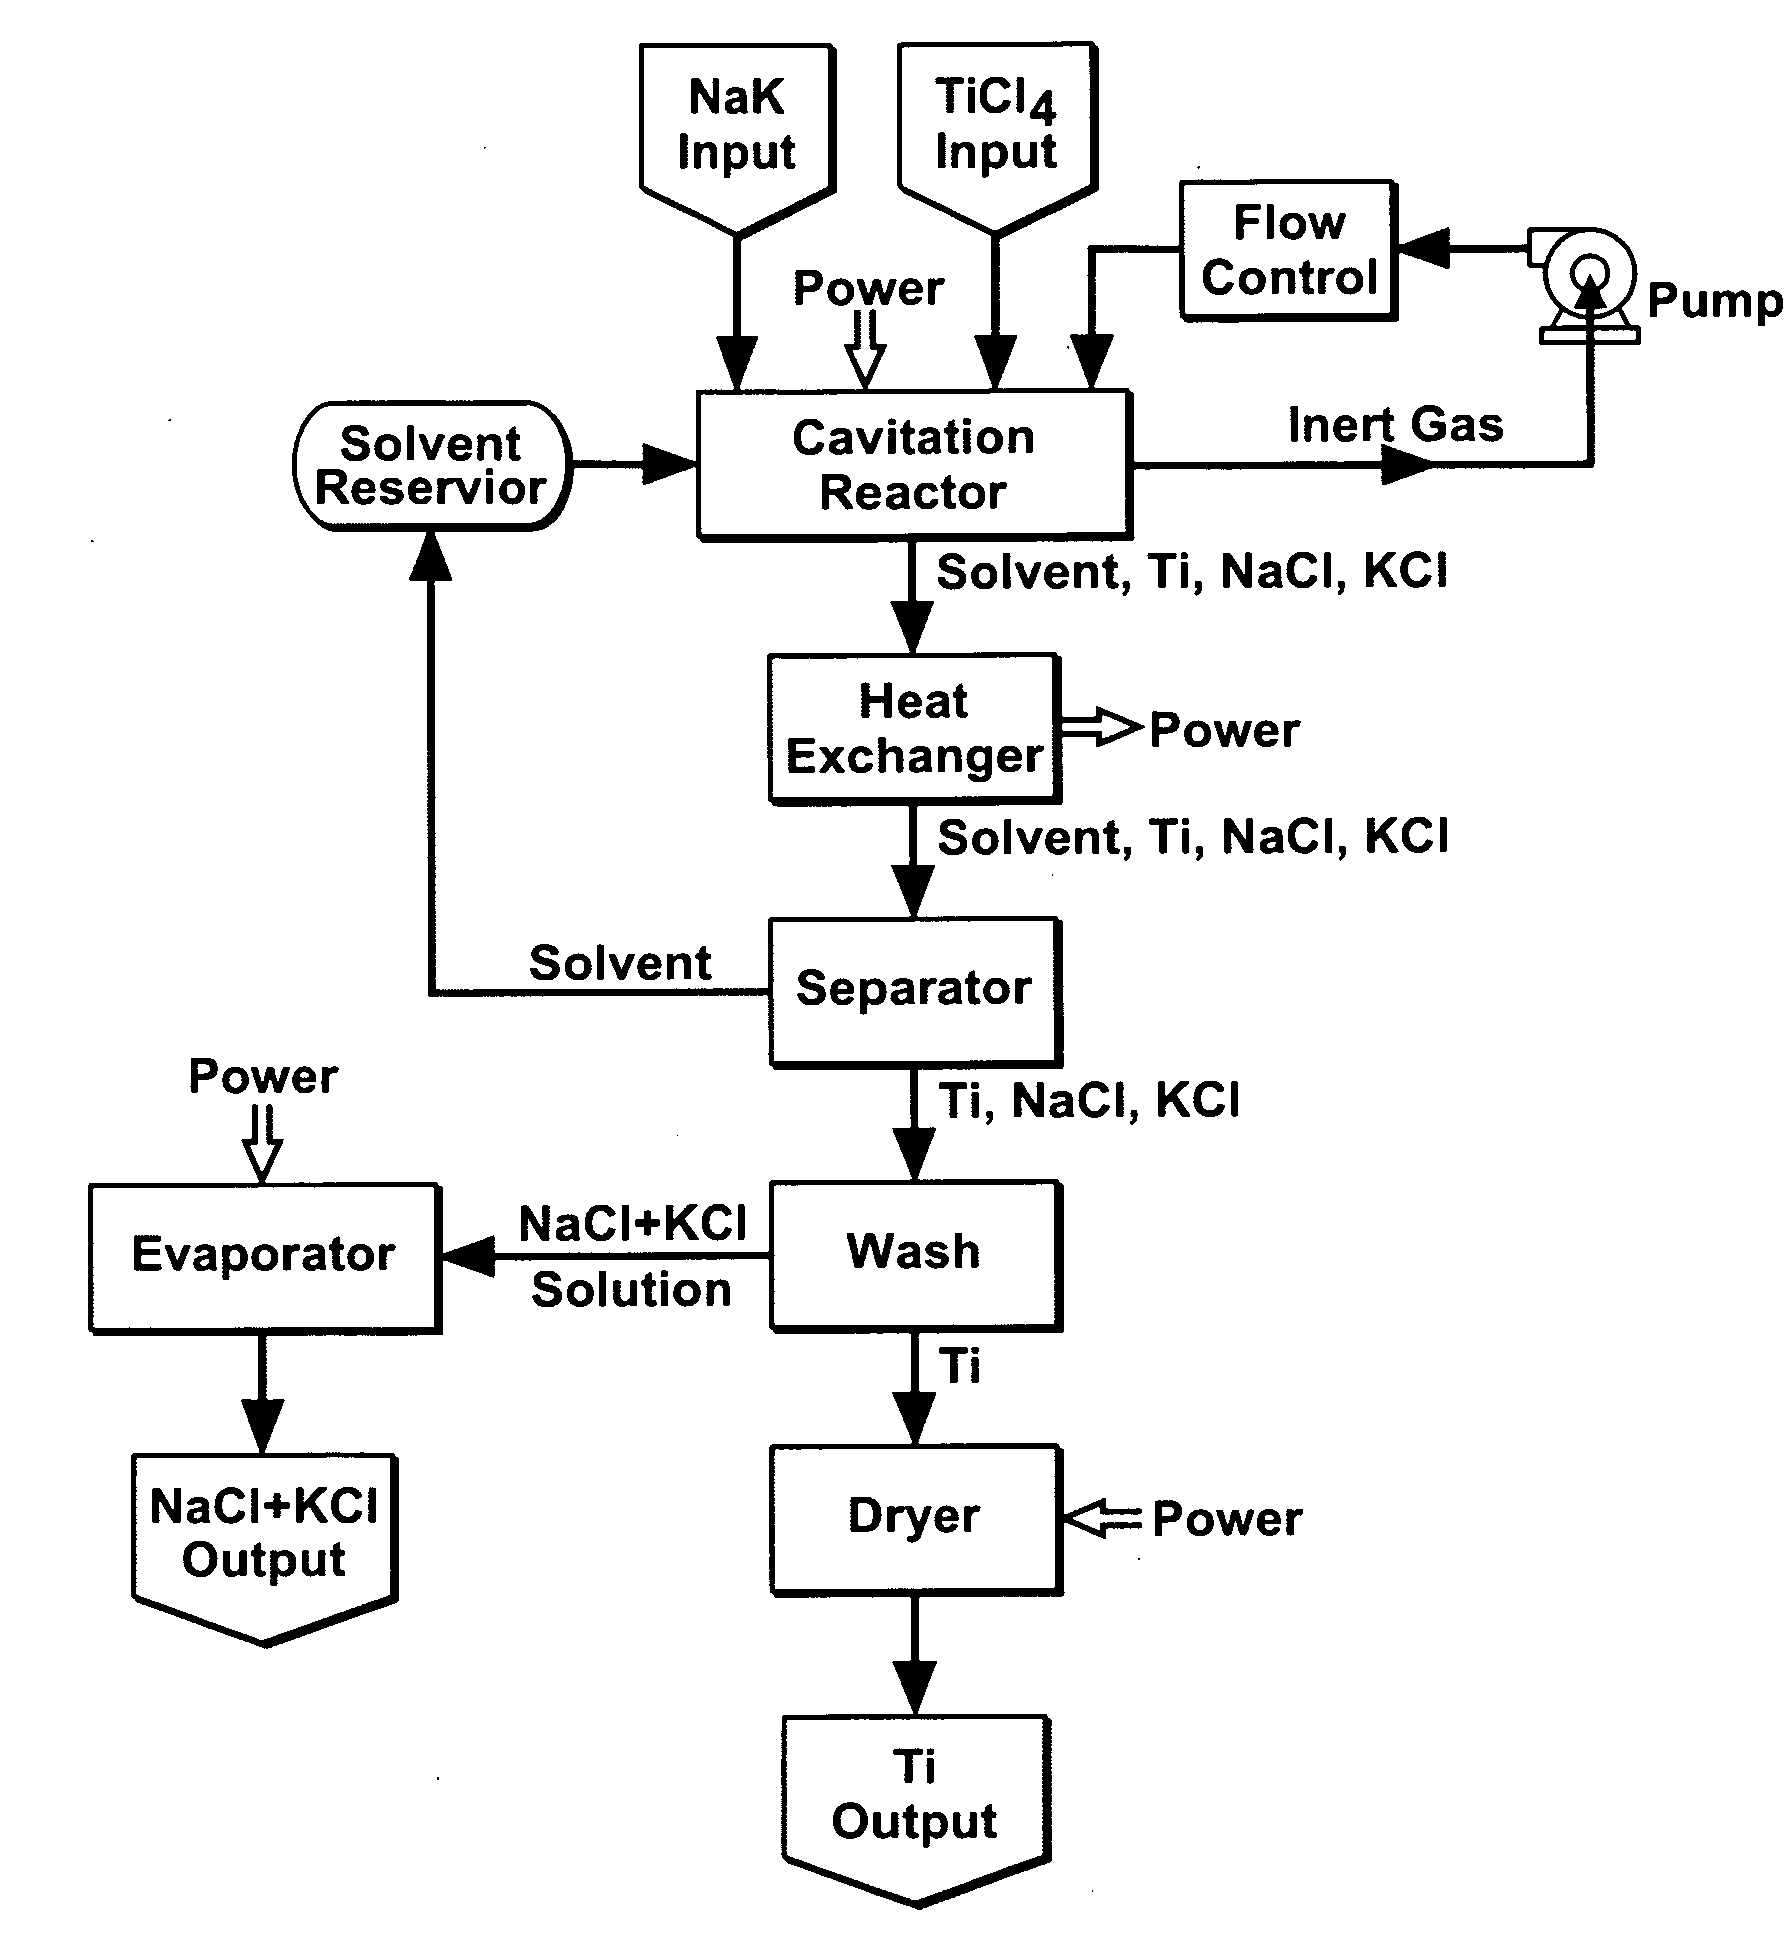 Cavitation process for products from precursor halides